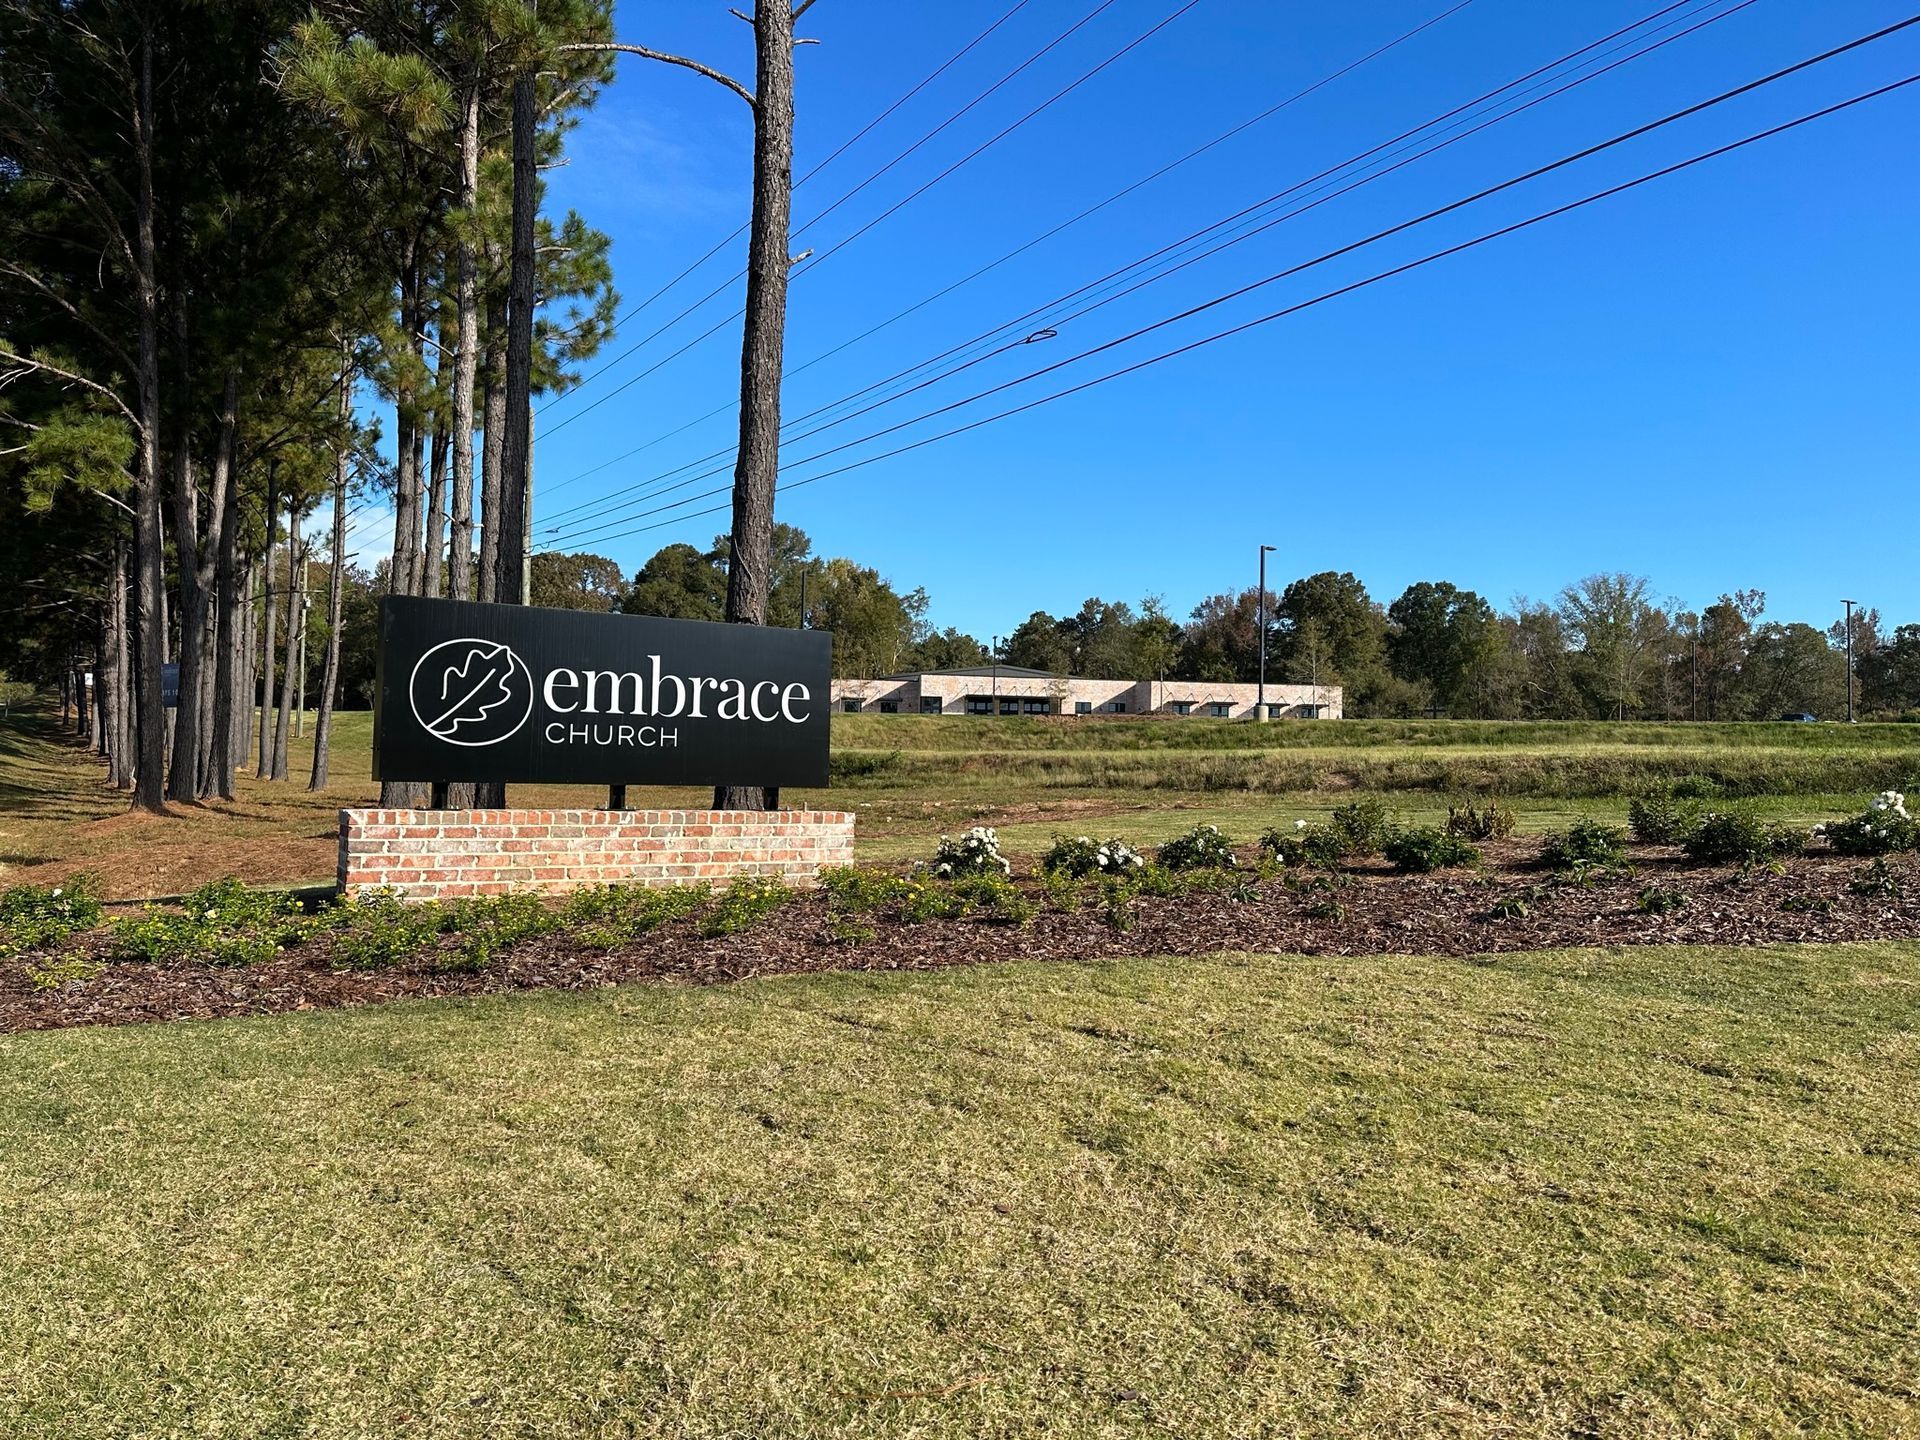 A sign that says embrace is in the middle of a grassy field.